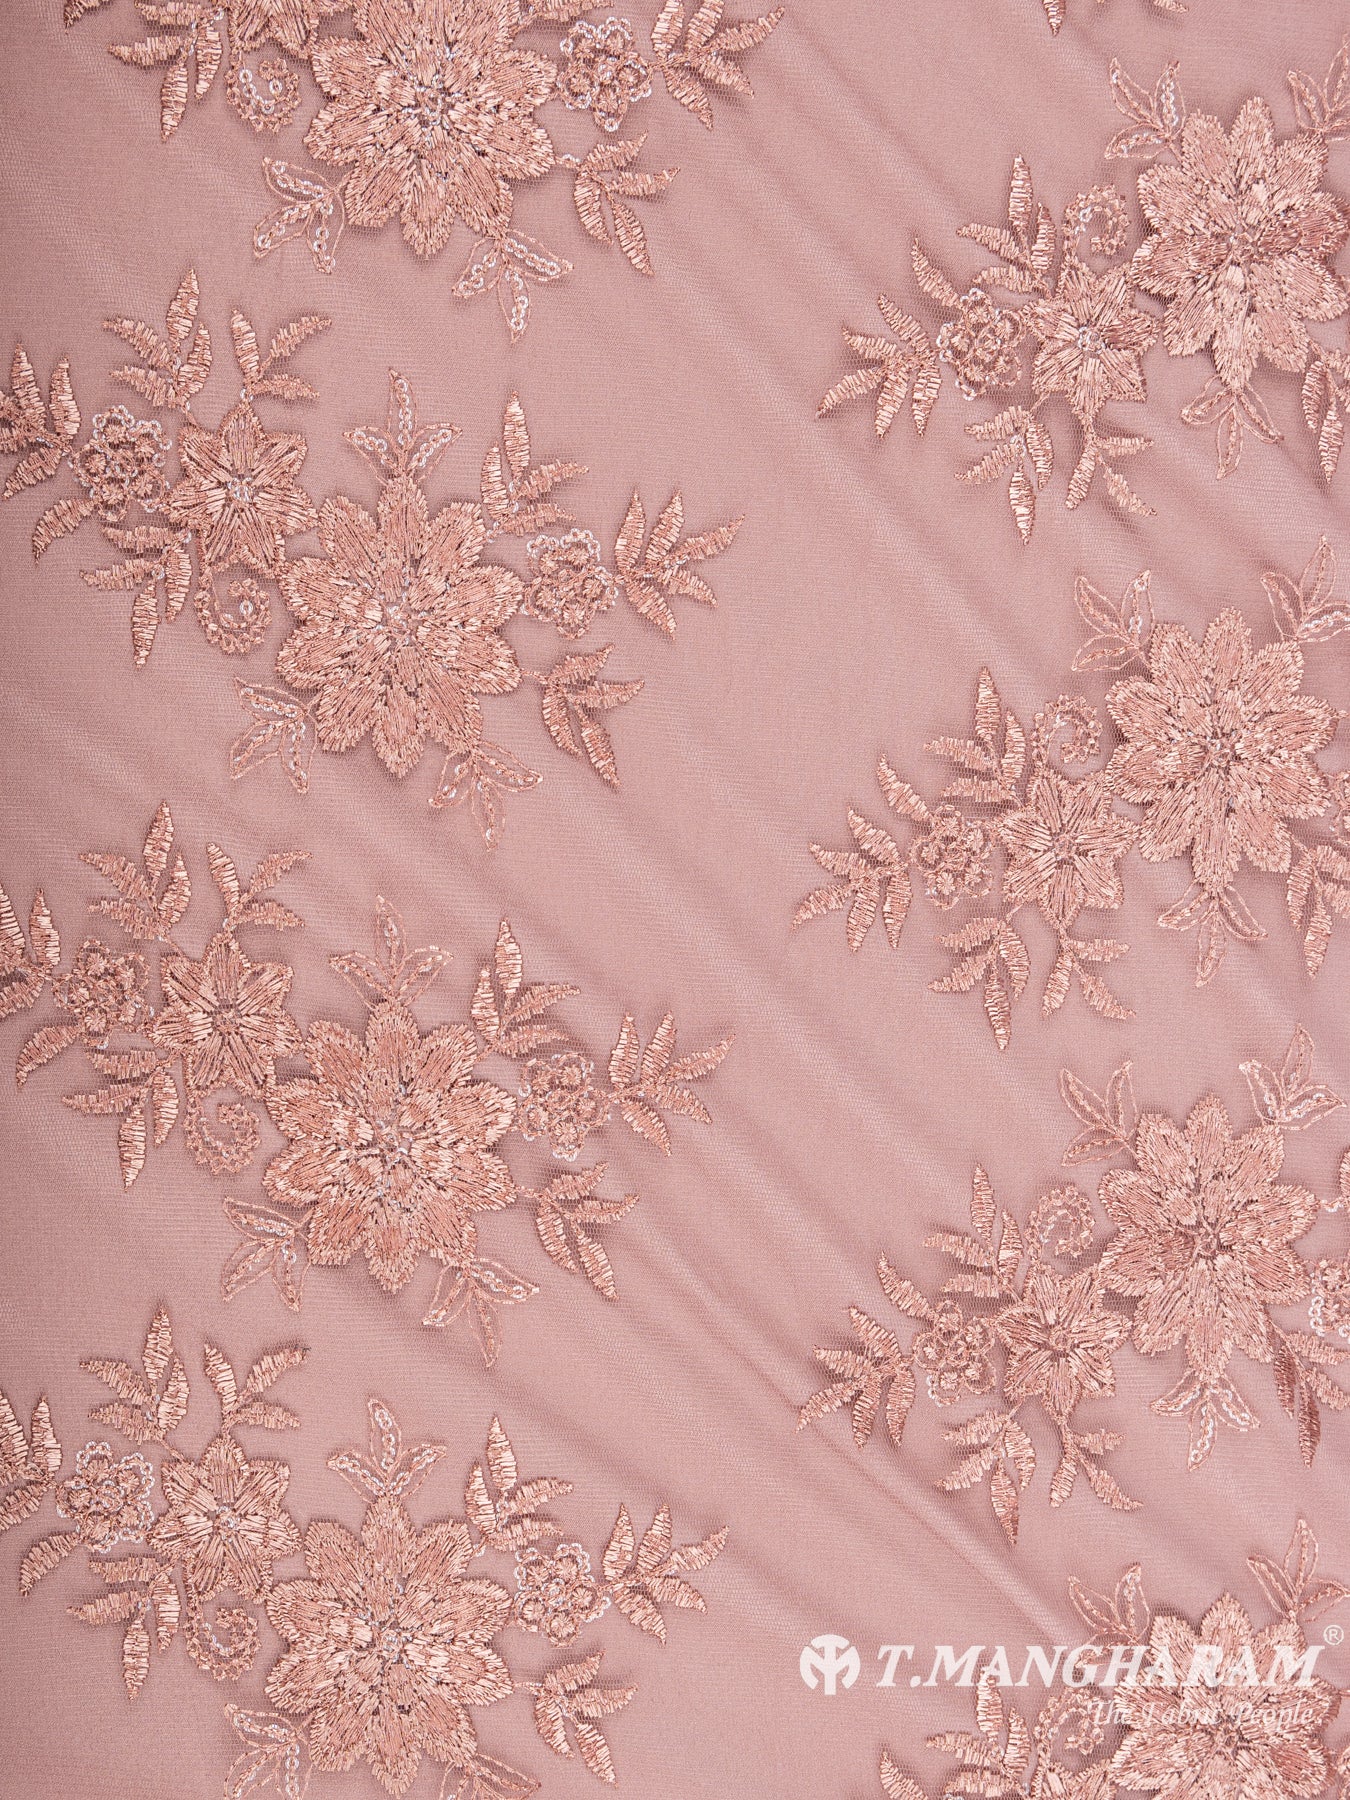 Pink Net Embroidery Fabric - EC6548 view-3